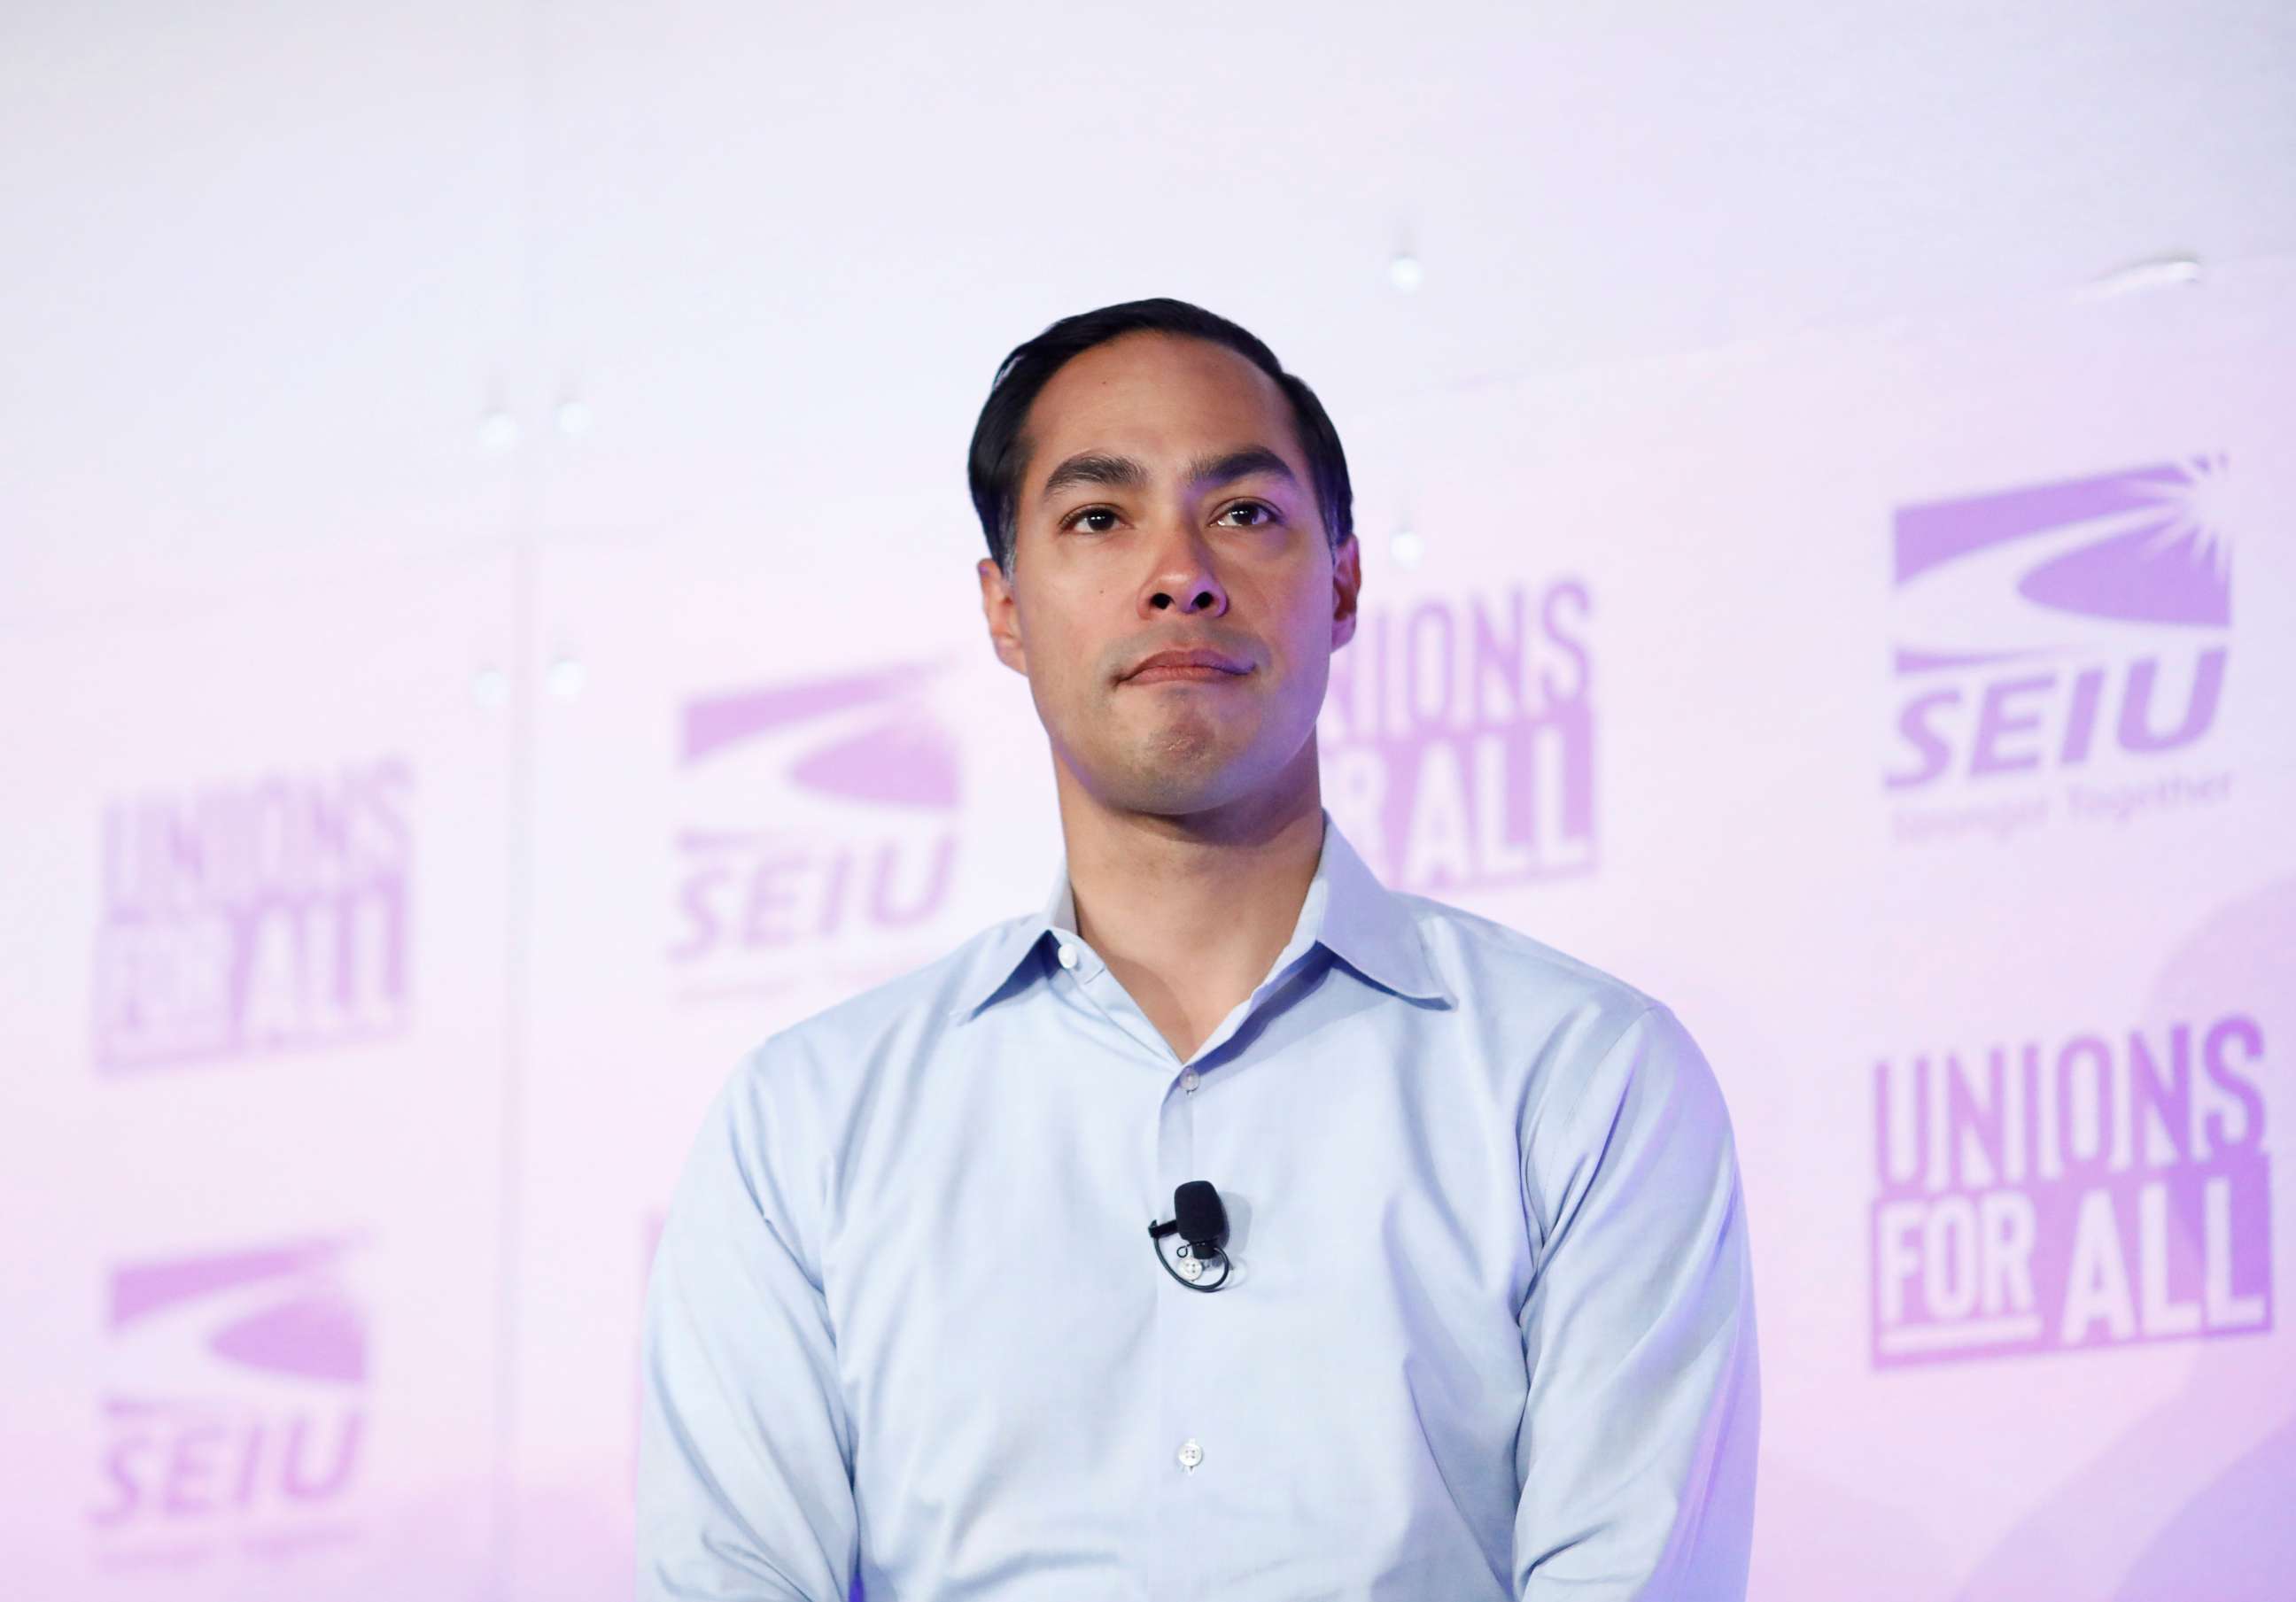 PHOTO: Democratic presidential candidate Former HUD Secretary Julian Castro attends the SEIU's Unions for All summit in Los Angeles, Oct. 4, 2019.